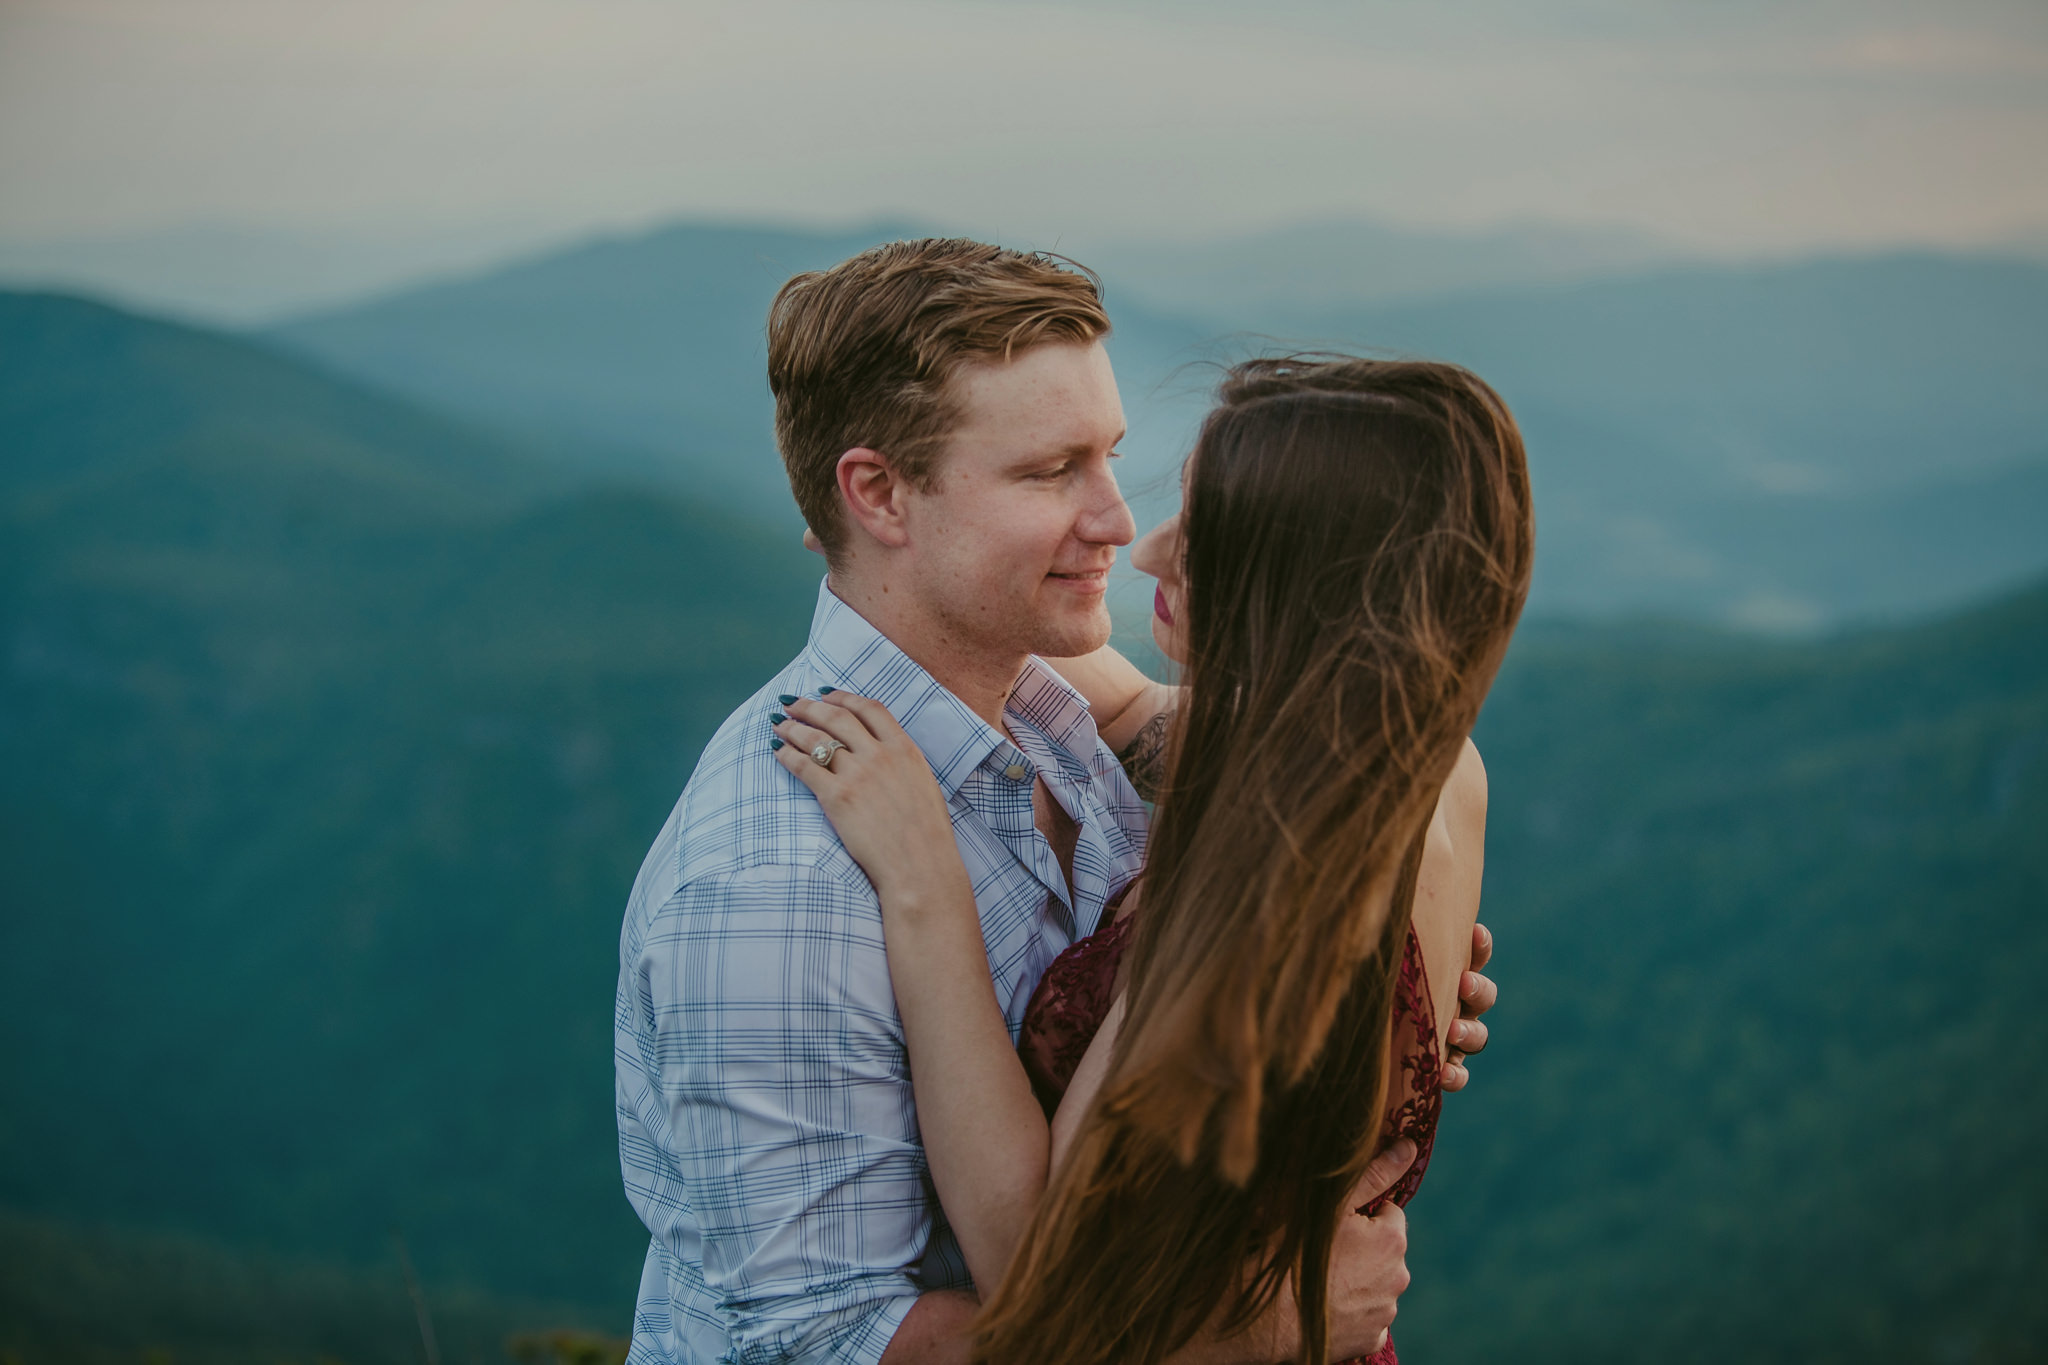 Hawksbill Mountain views are perfect for a couple celebrating their anniversary with Mabyn Ludke Photography